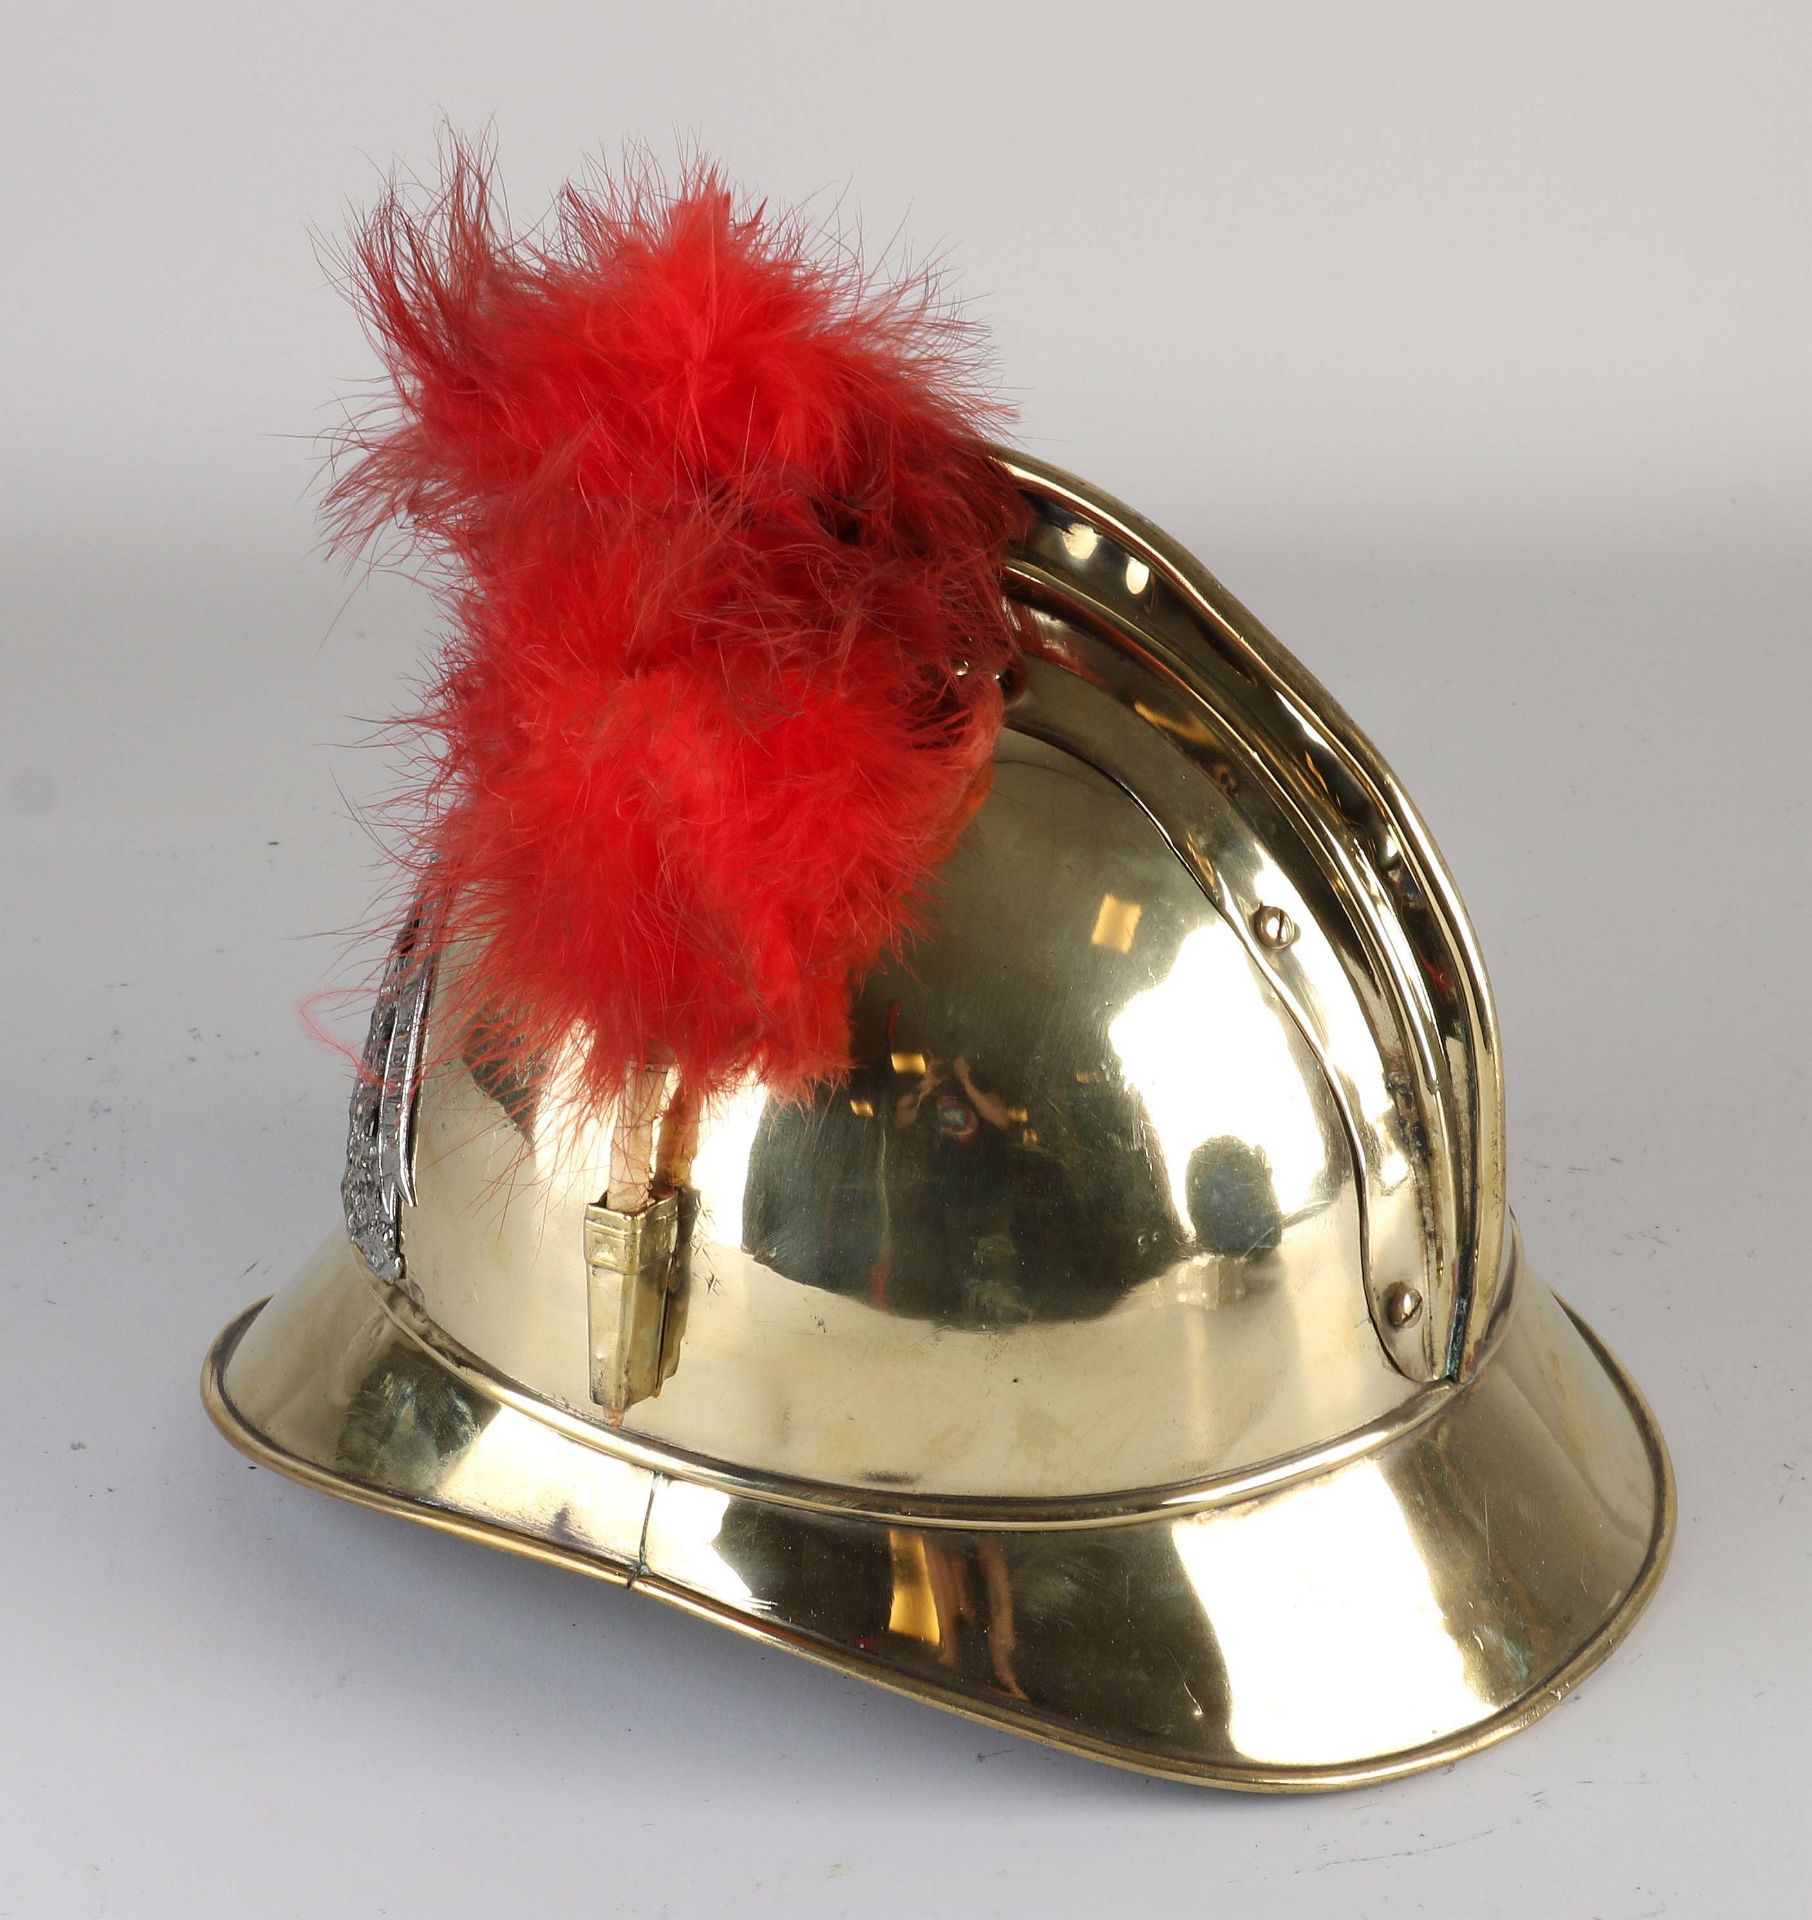 Antique French fire helmet - Image 2 of 2